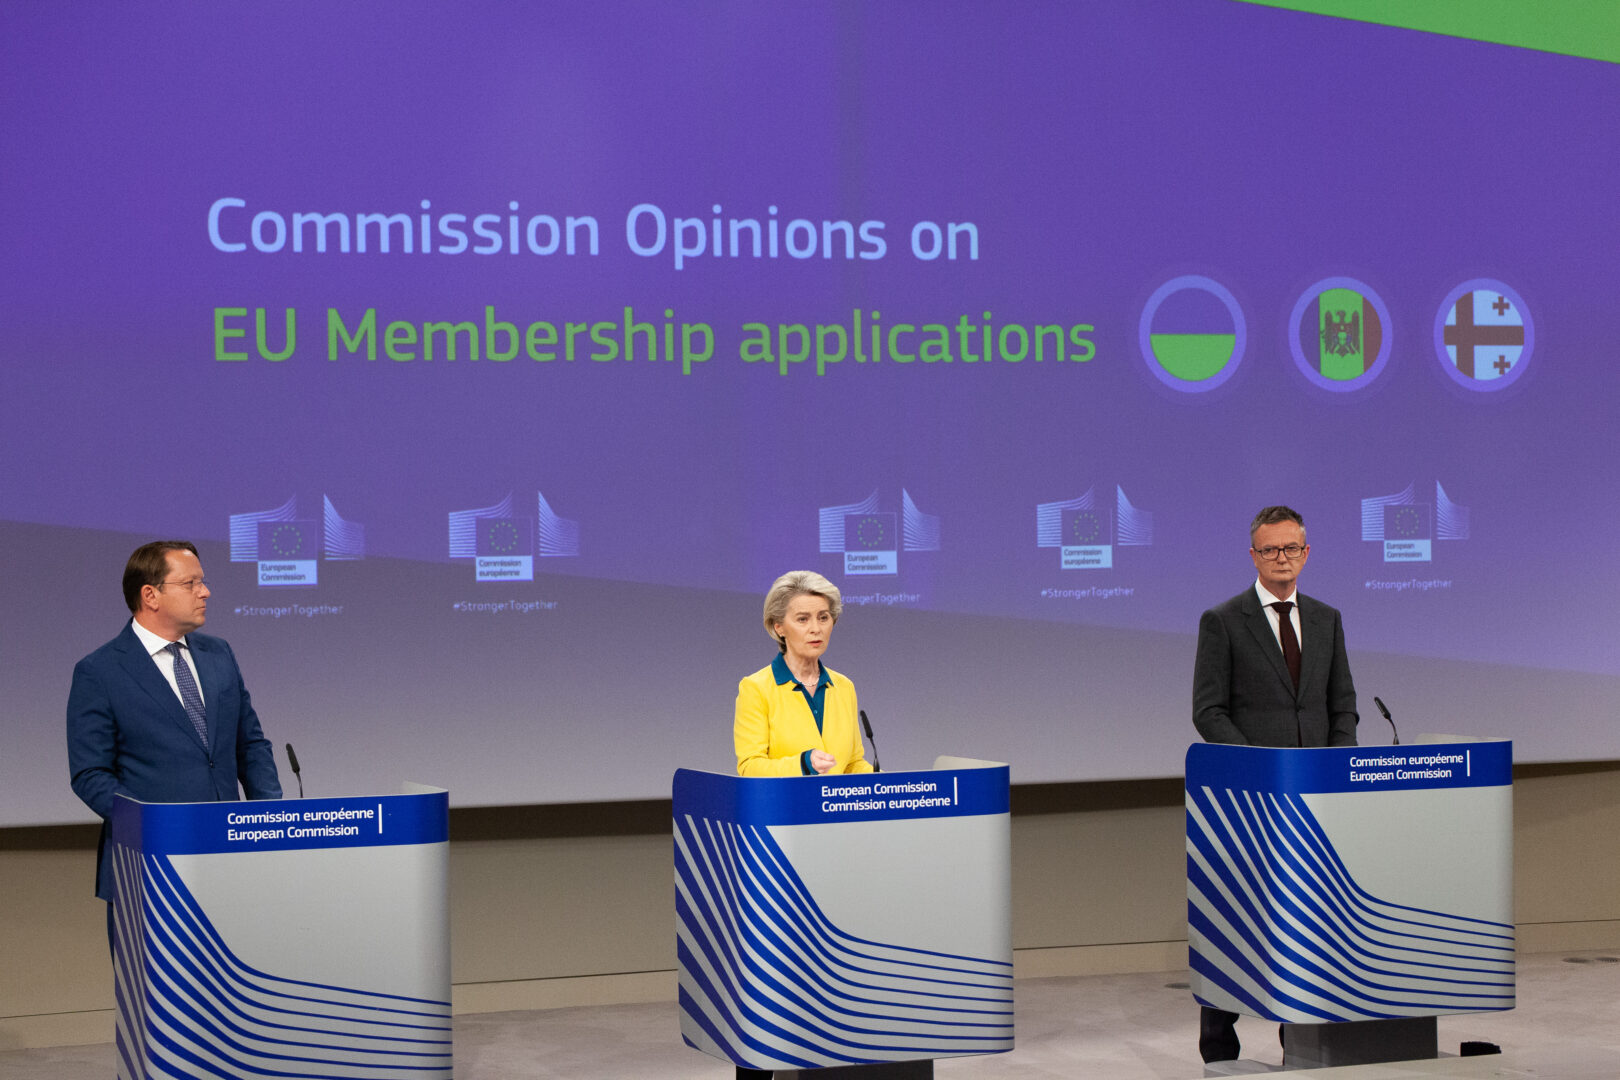 Read Out Of The Weekly Meeting Of The Von Der Leyen Commission By Ursula Von Der Leyen, President Of The European Commission And Olivér Várhelyi, European Commissioner, On The Commission’s Opinions On The Eu Membership Applications By Ukraine, Moldova